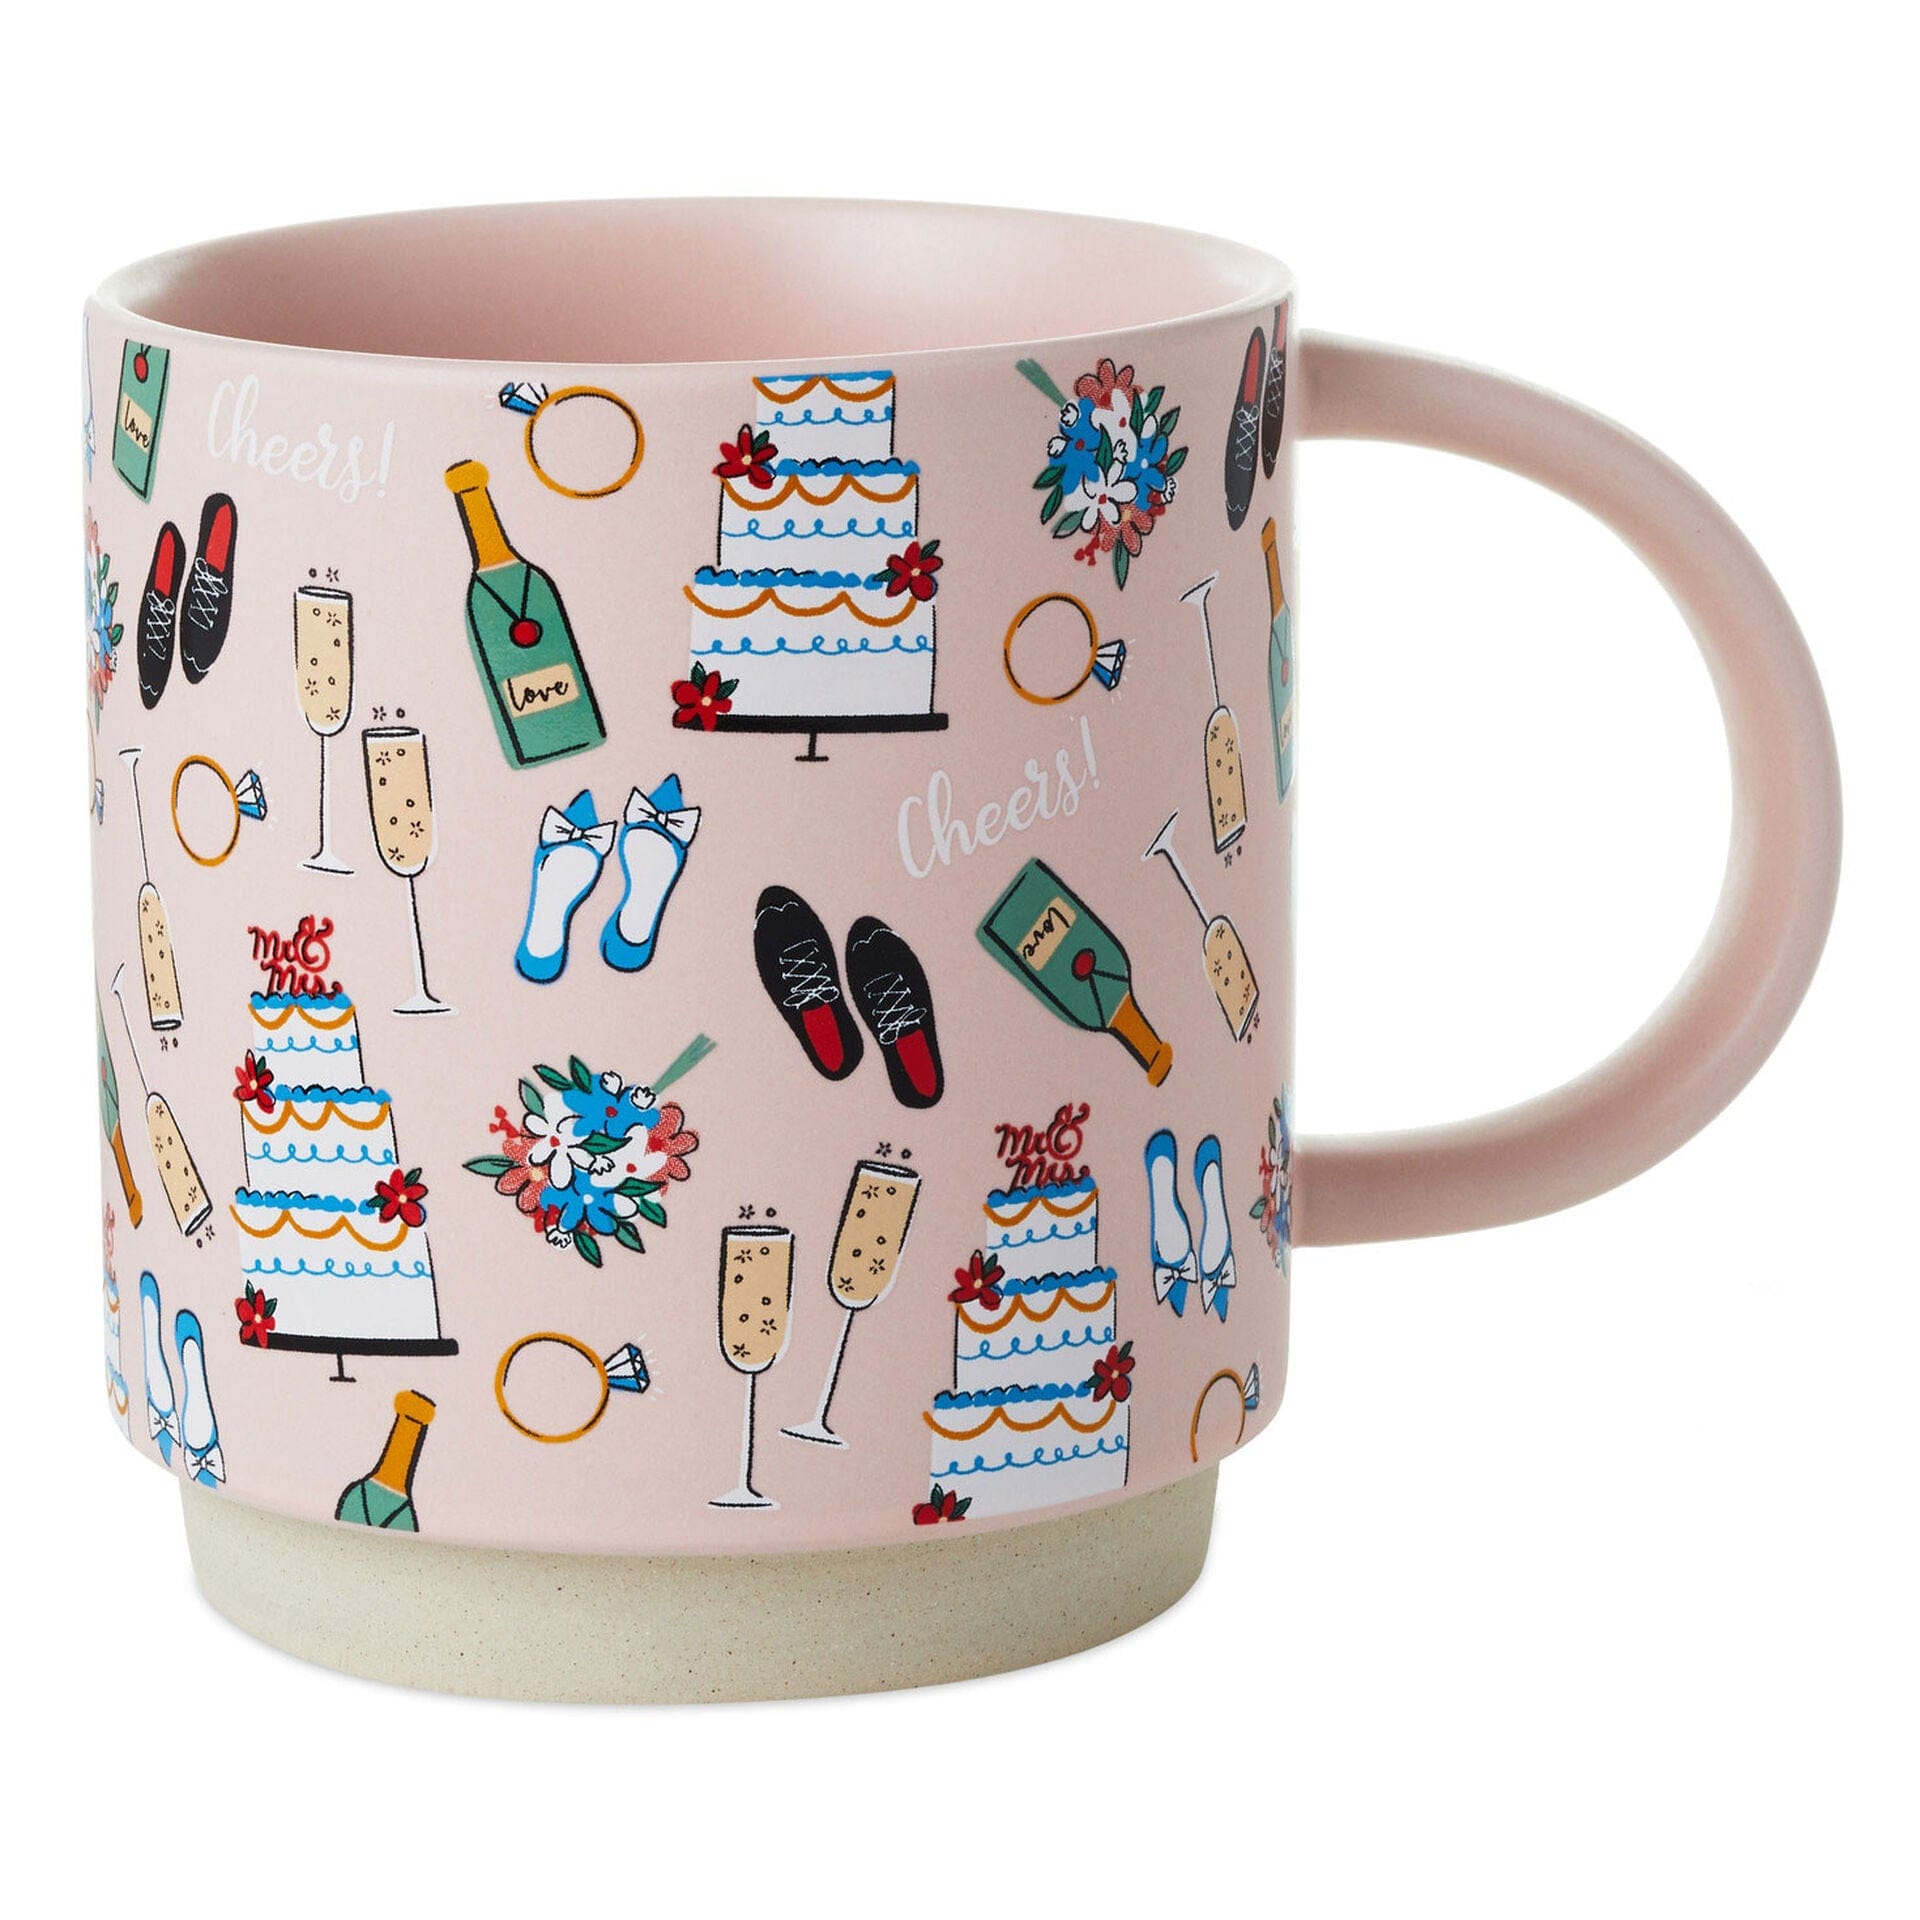 Corkcicle Rifle Paper Co. Garden Party Mug, 16 oz. - Insulated Tumblers -  Hallmark